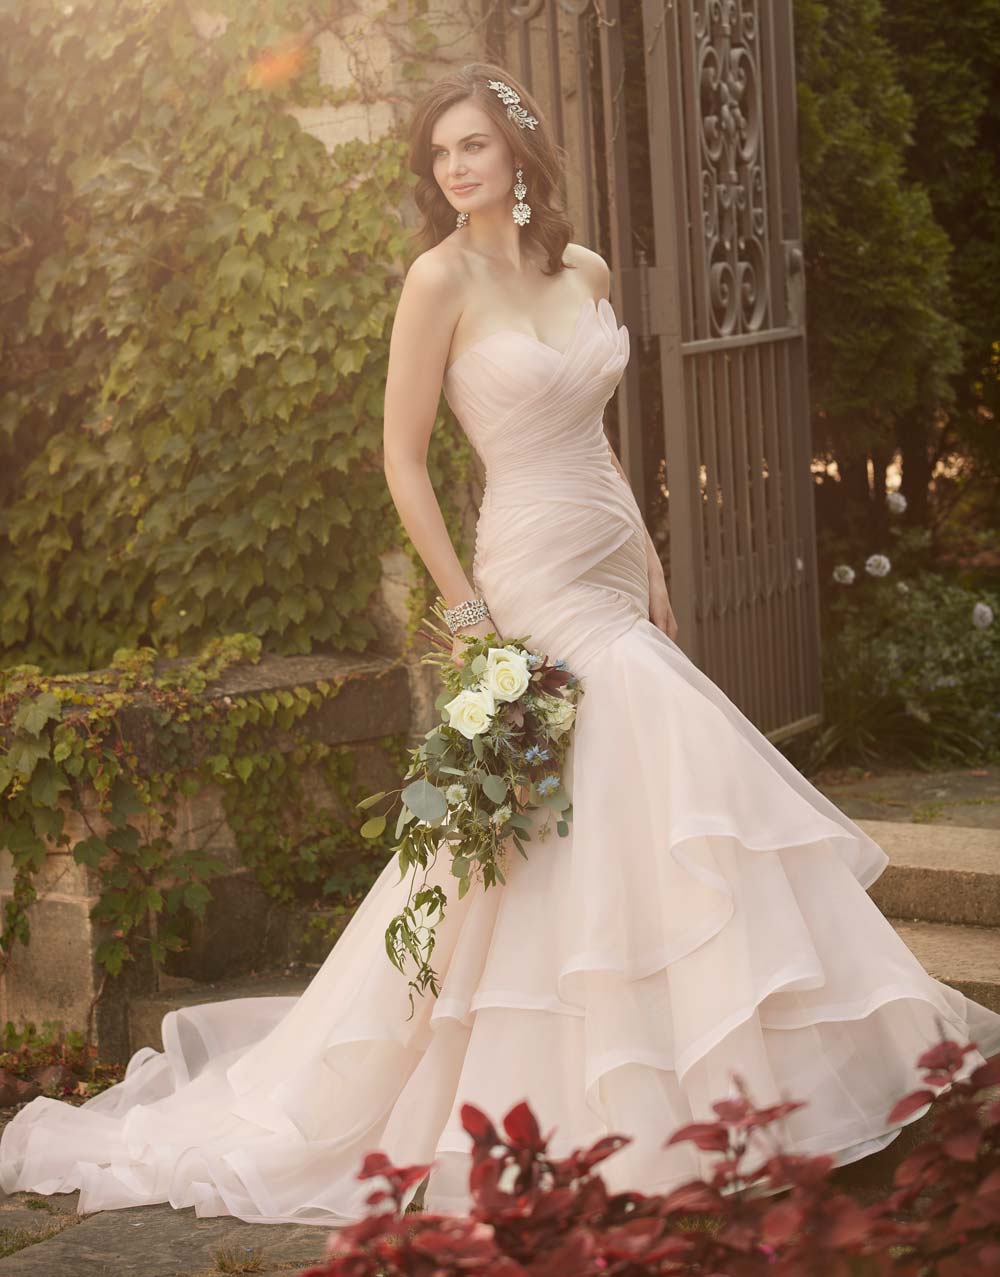 Top10 sexy tiered wedding dresses 03